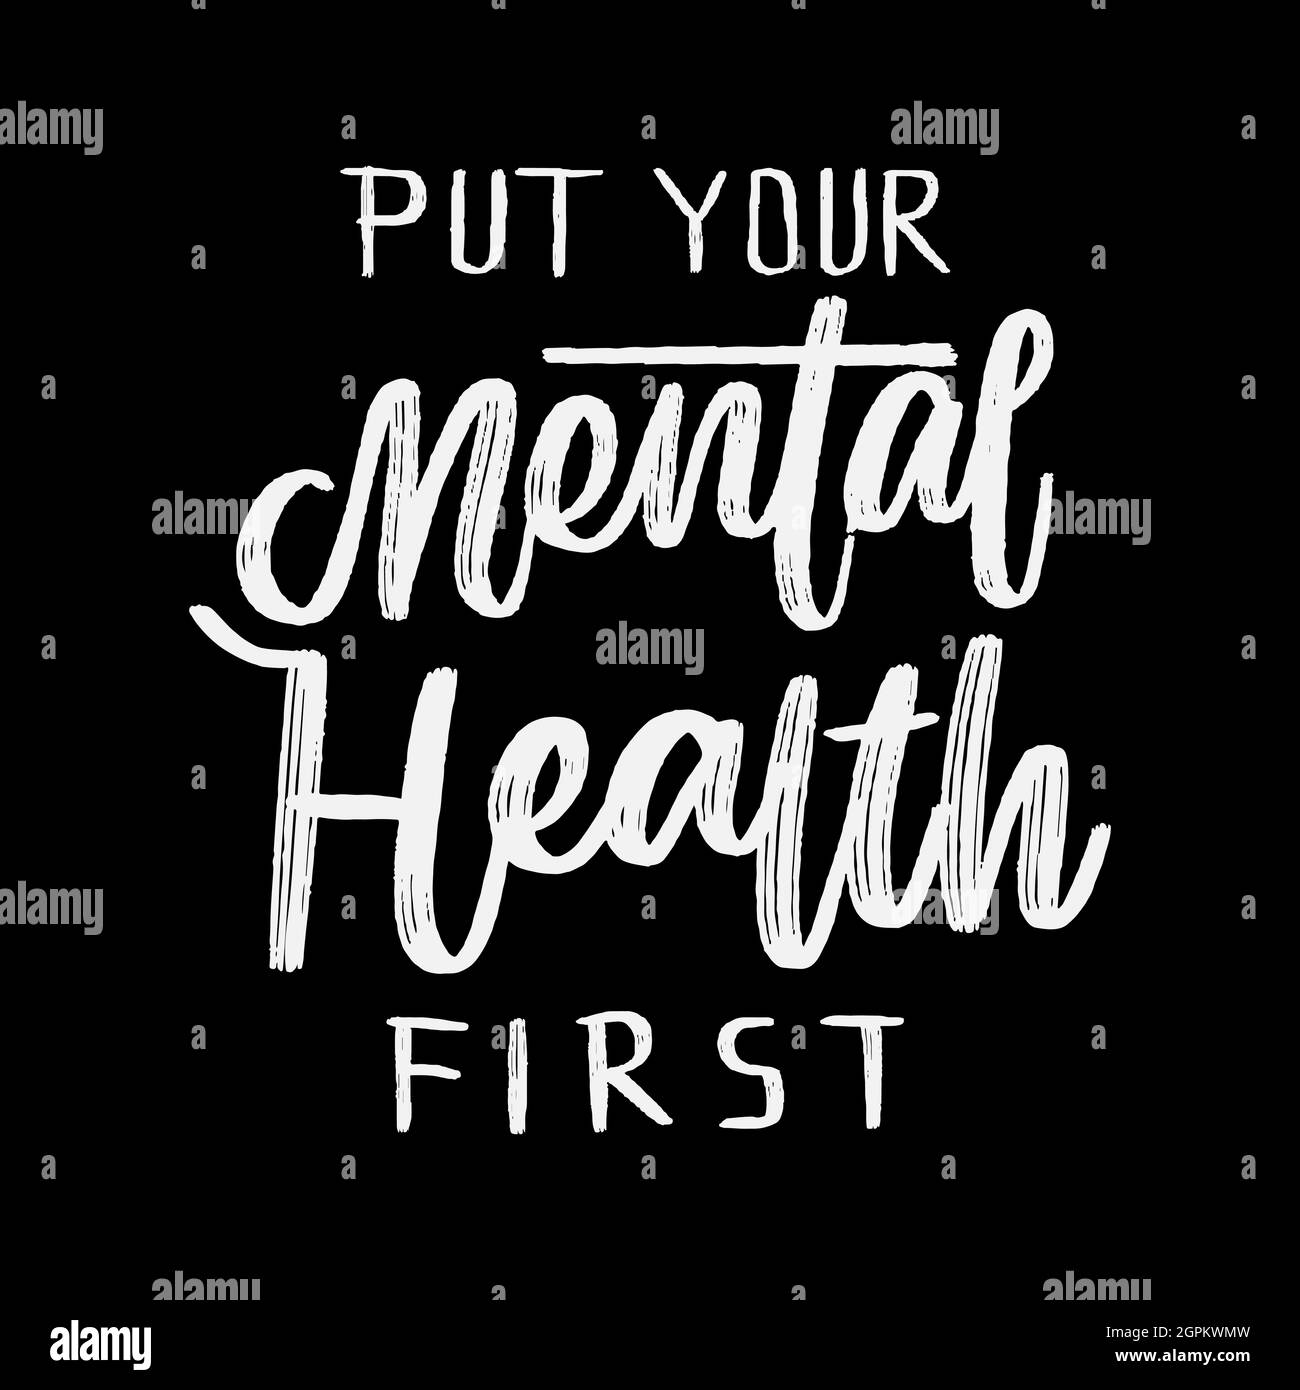 Mental health quotes Black and White Stock Photos & Images - Alamy